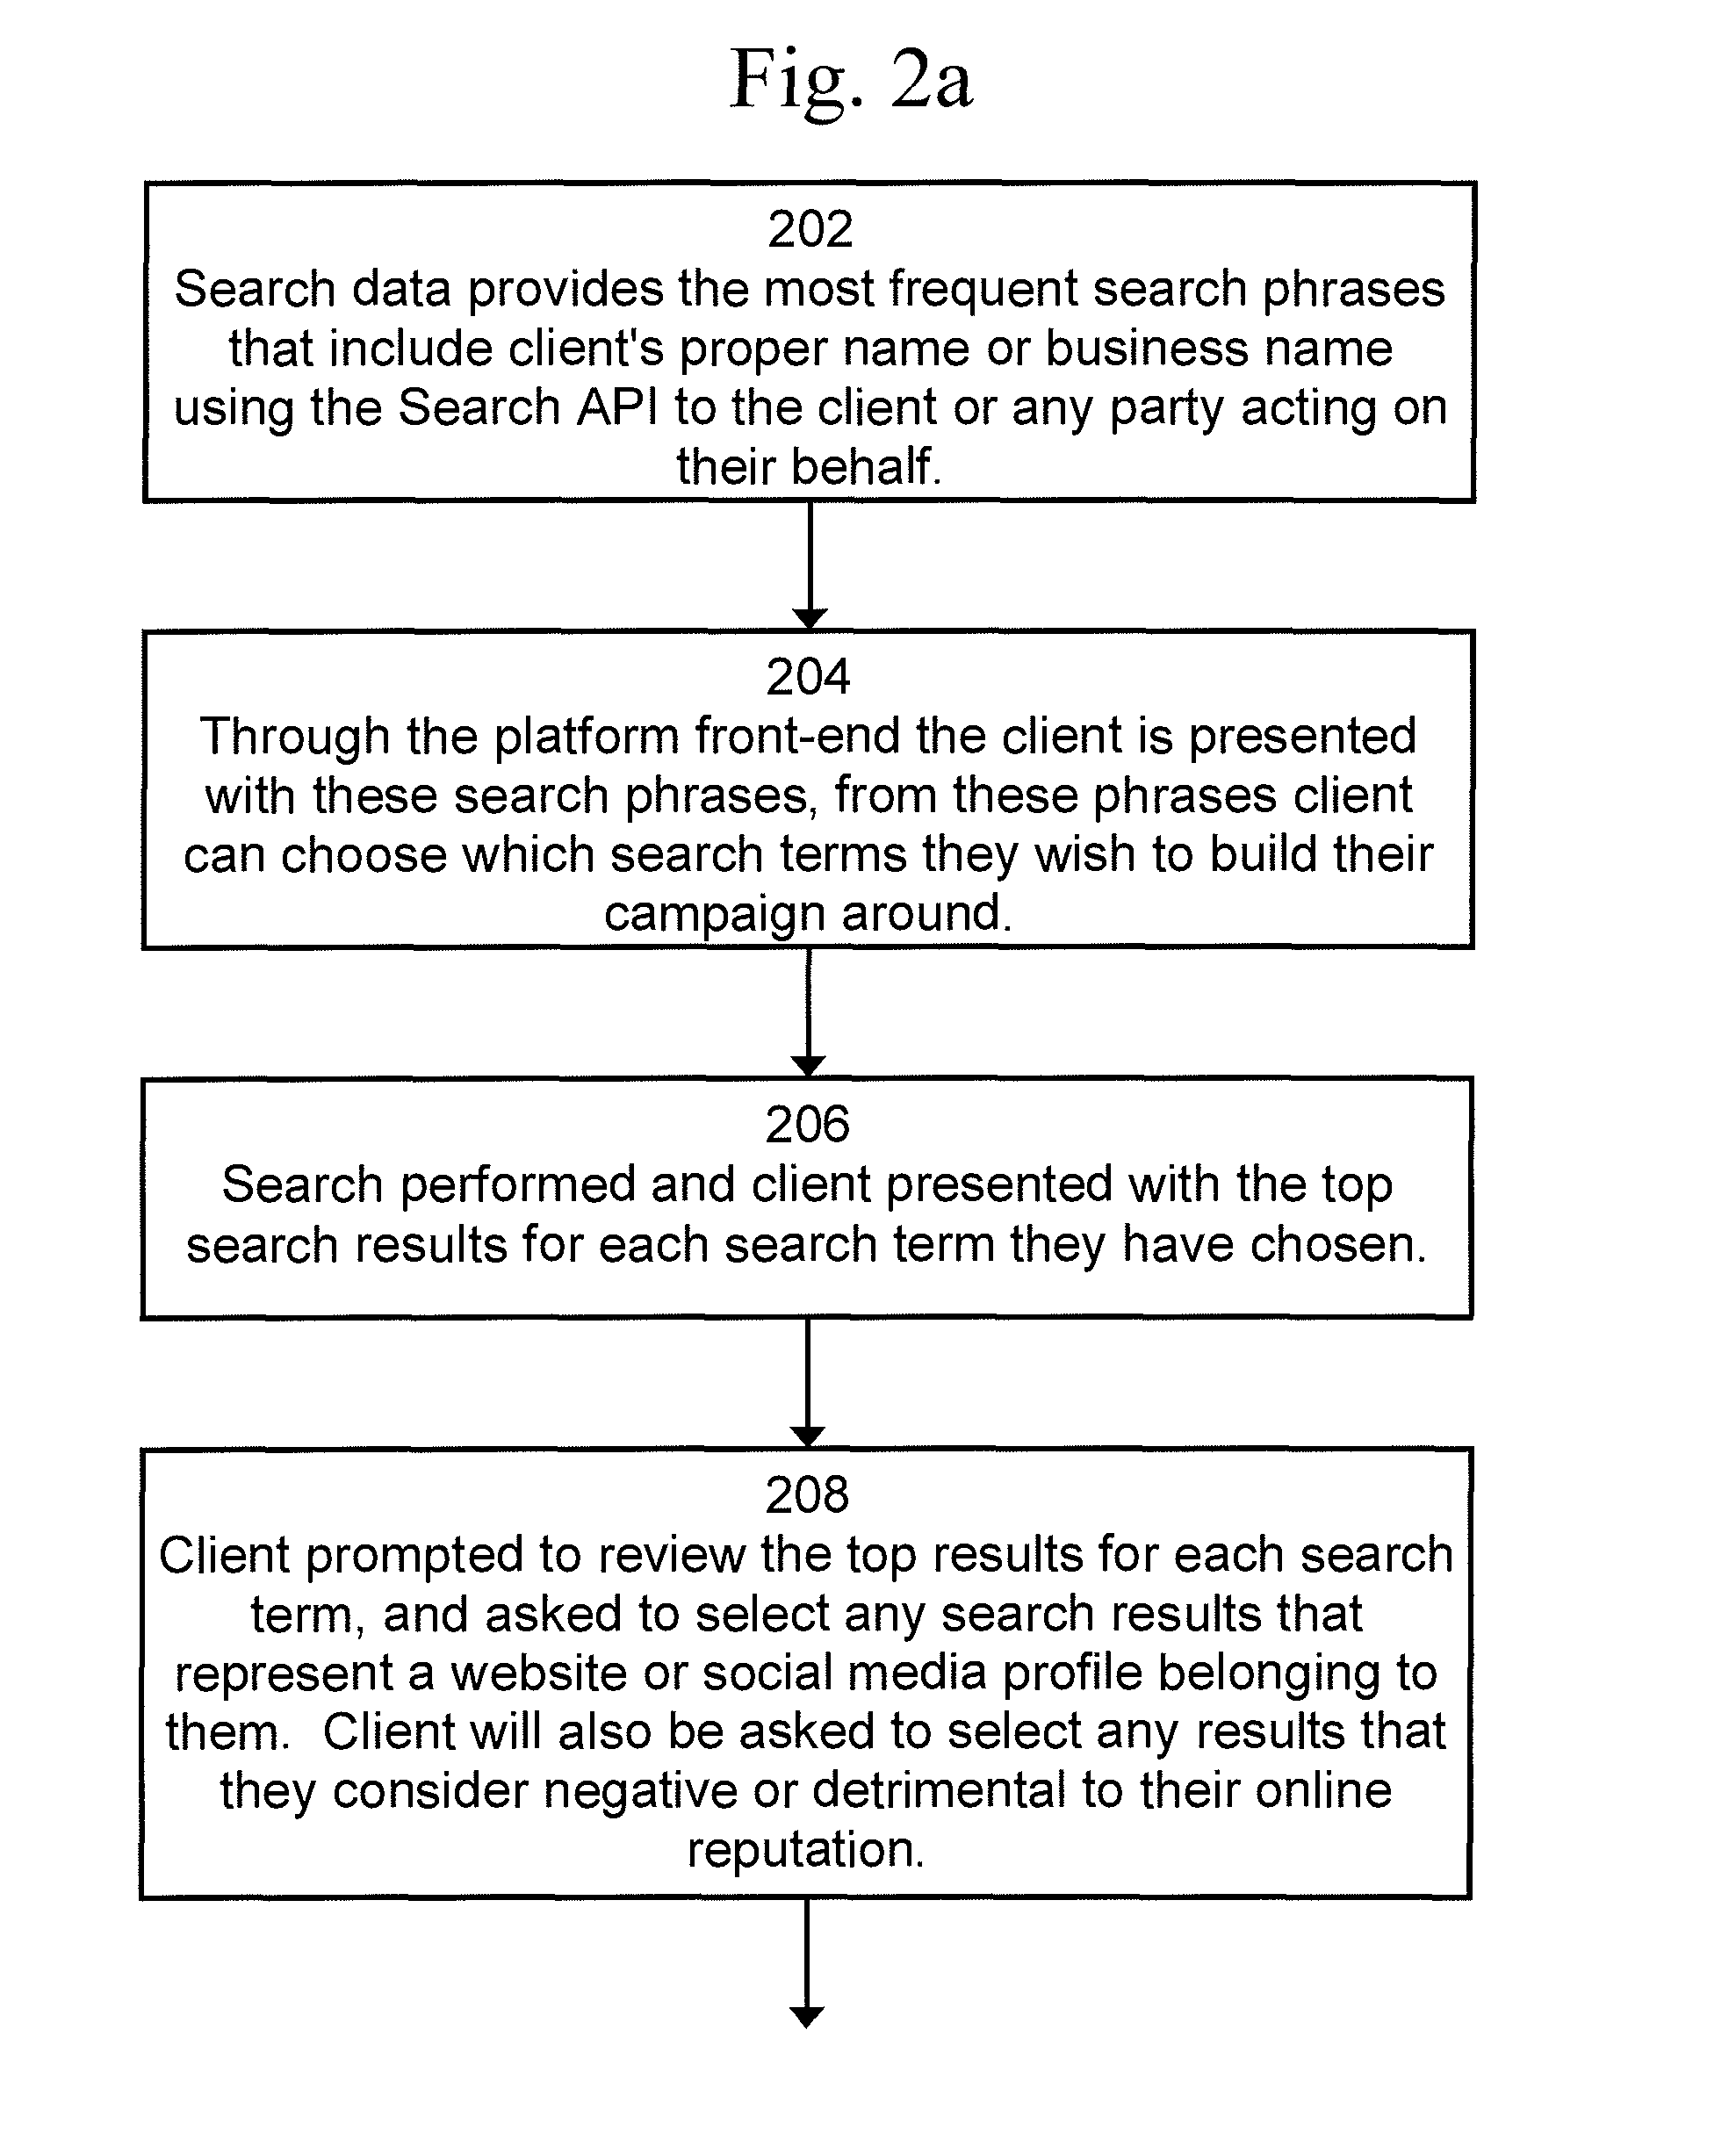 Method, System, And Computer Program Product For Monitoring Online Reputations With The Capability Of Creating New Content